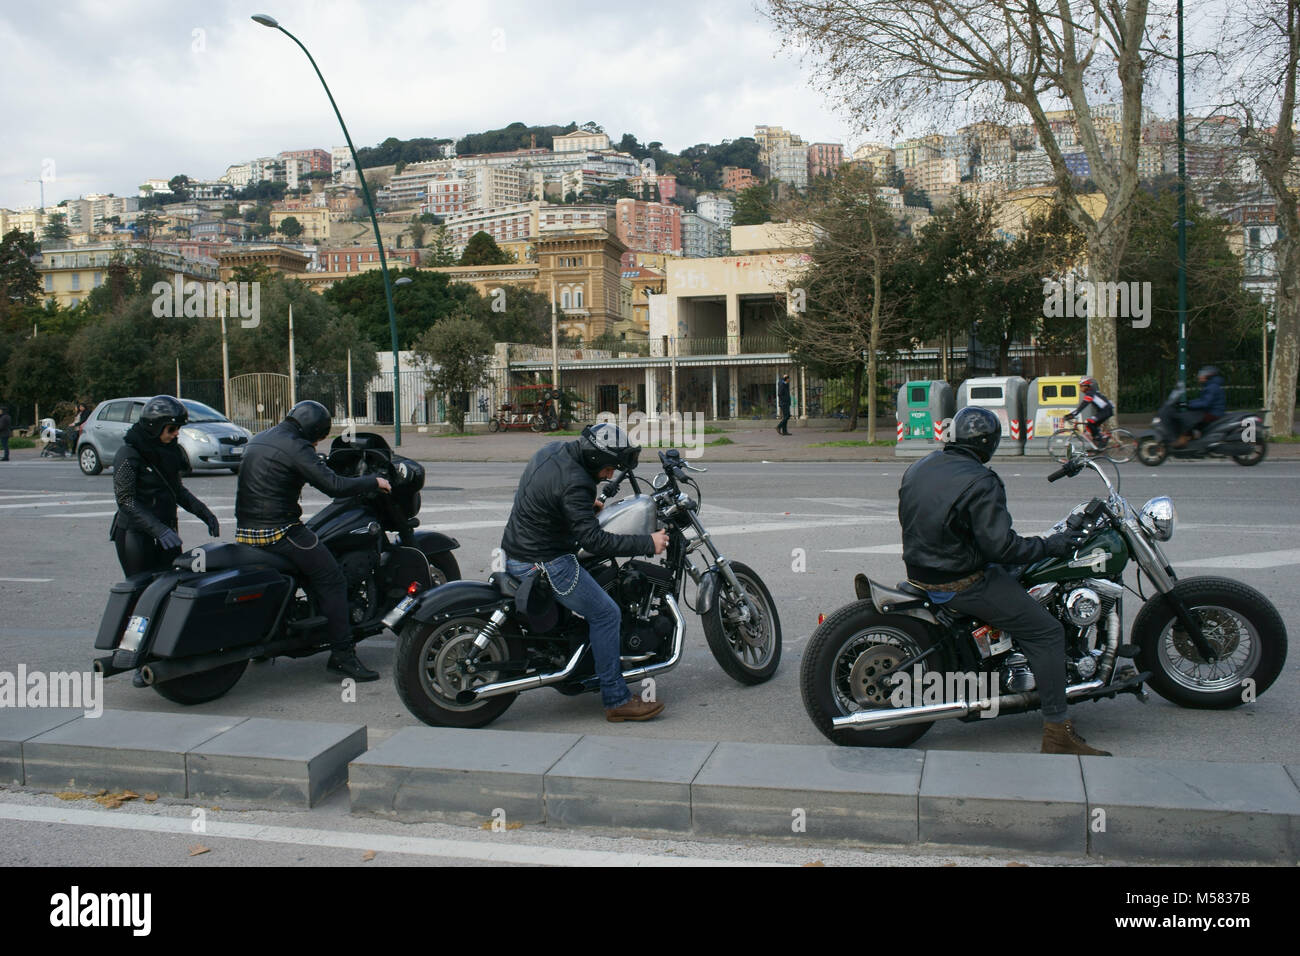 Harley Davidson meeting in Naples, Italy Stock Photo